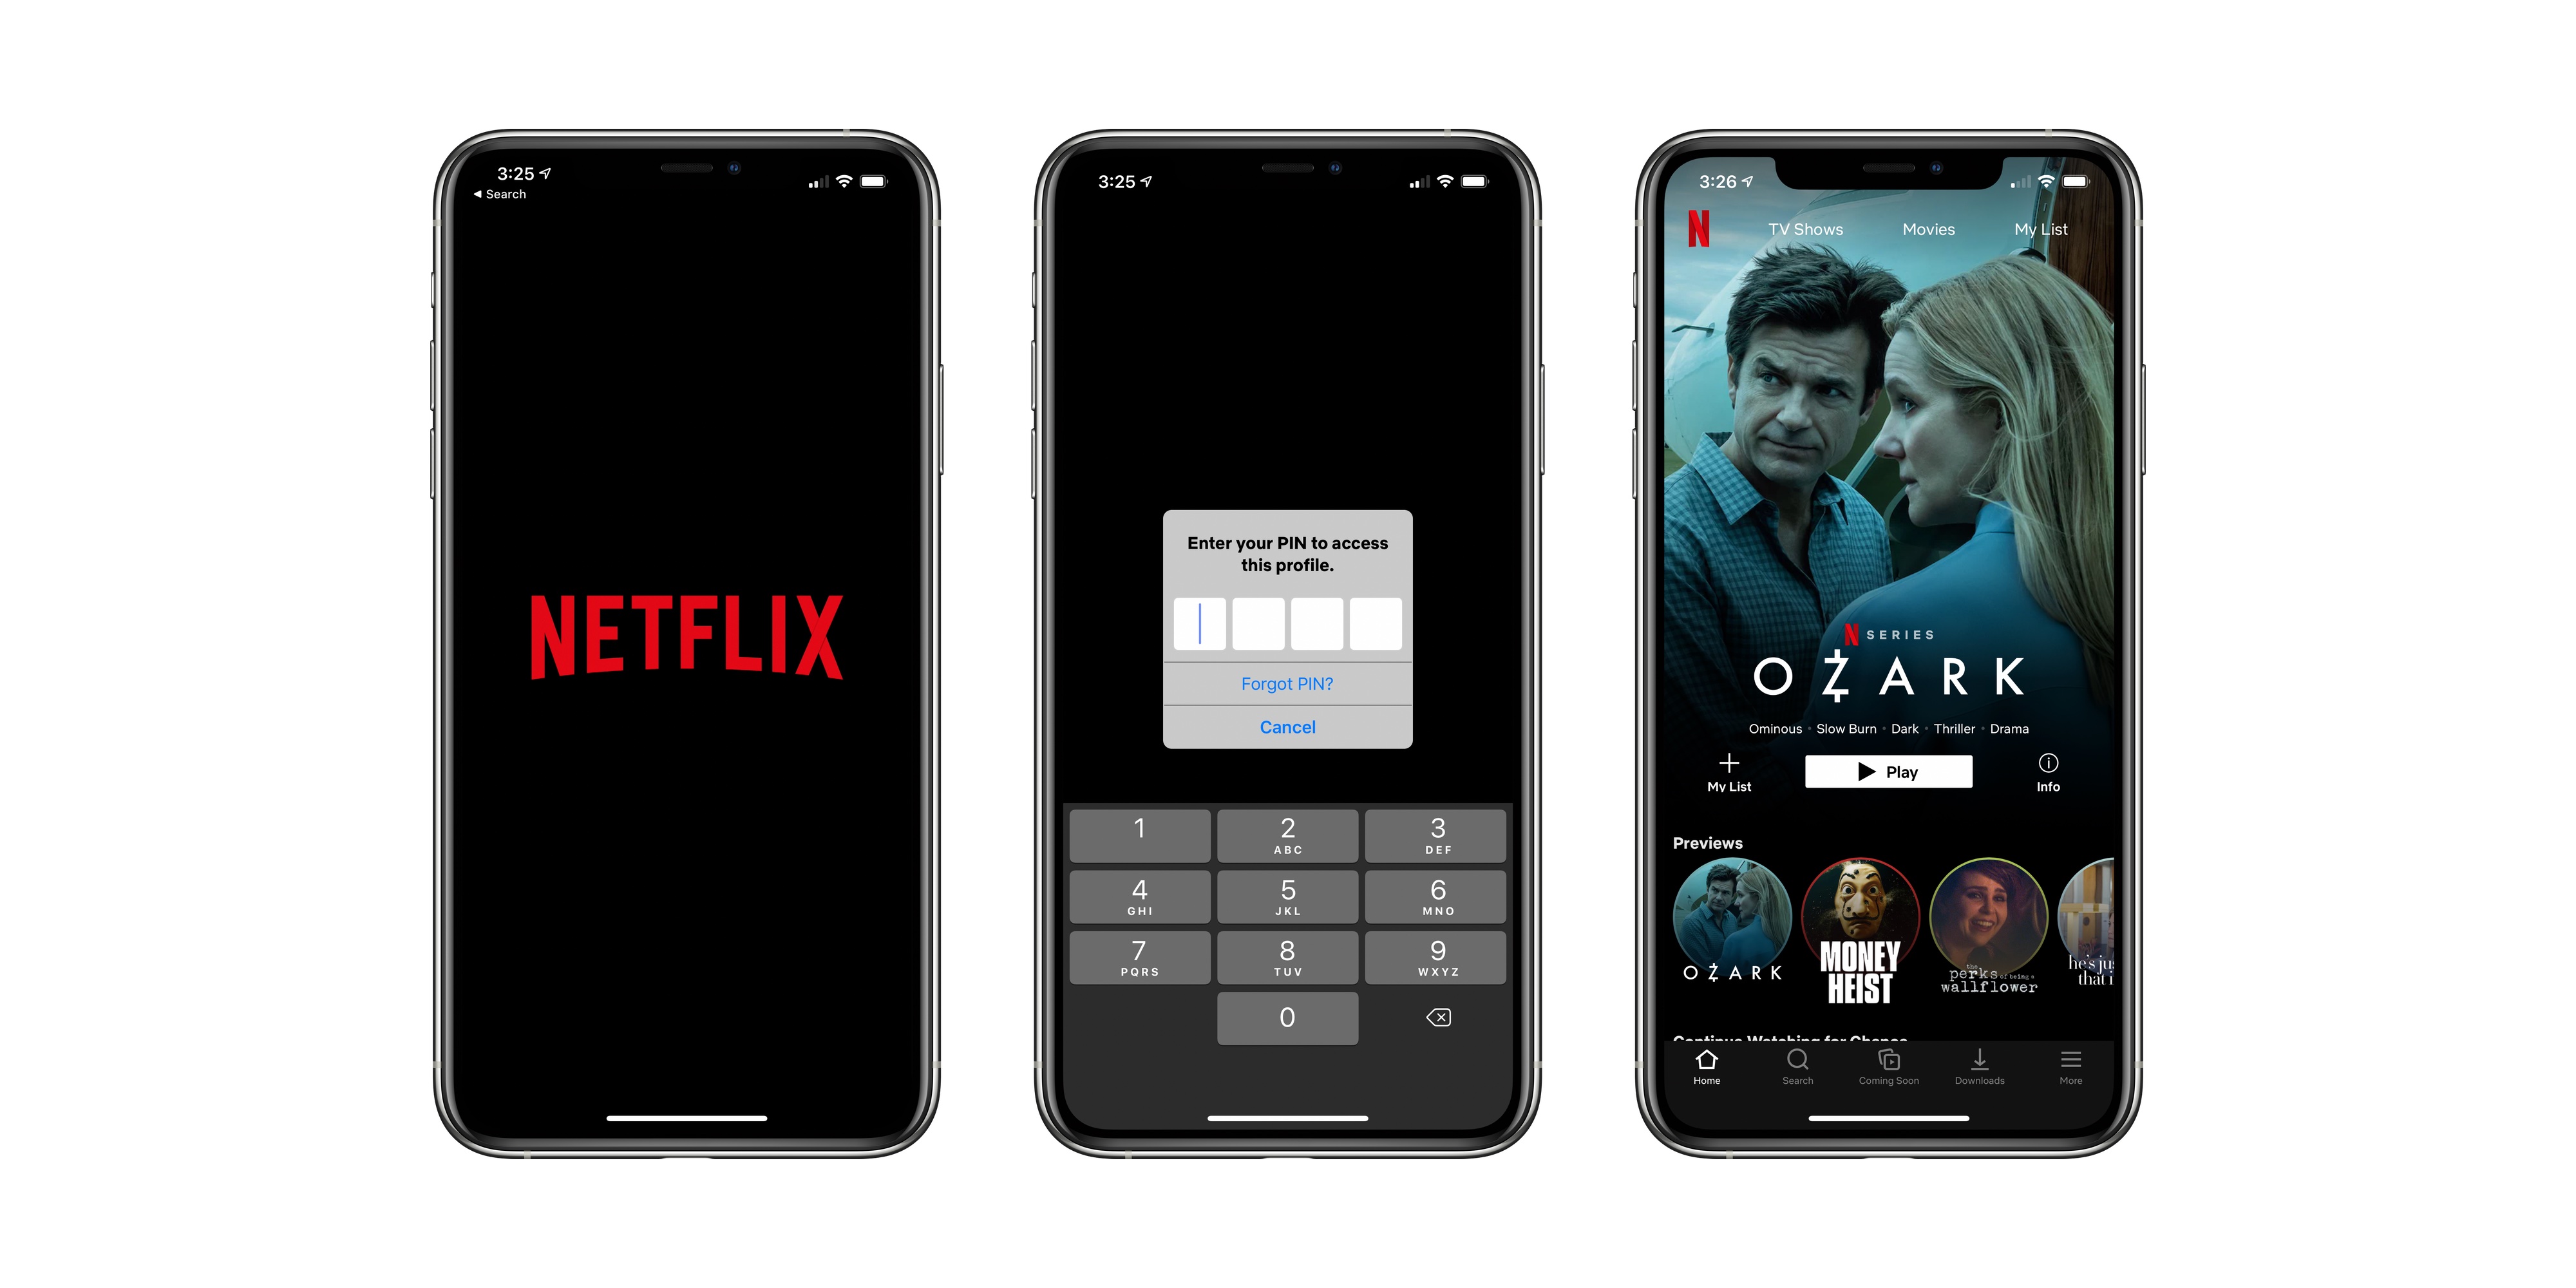 How to lock my Netflix profile using a PIN code - Quora